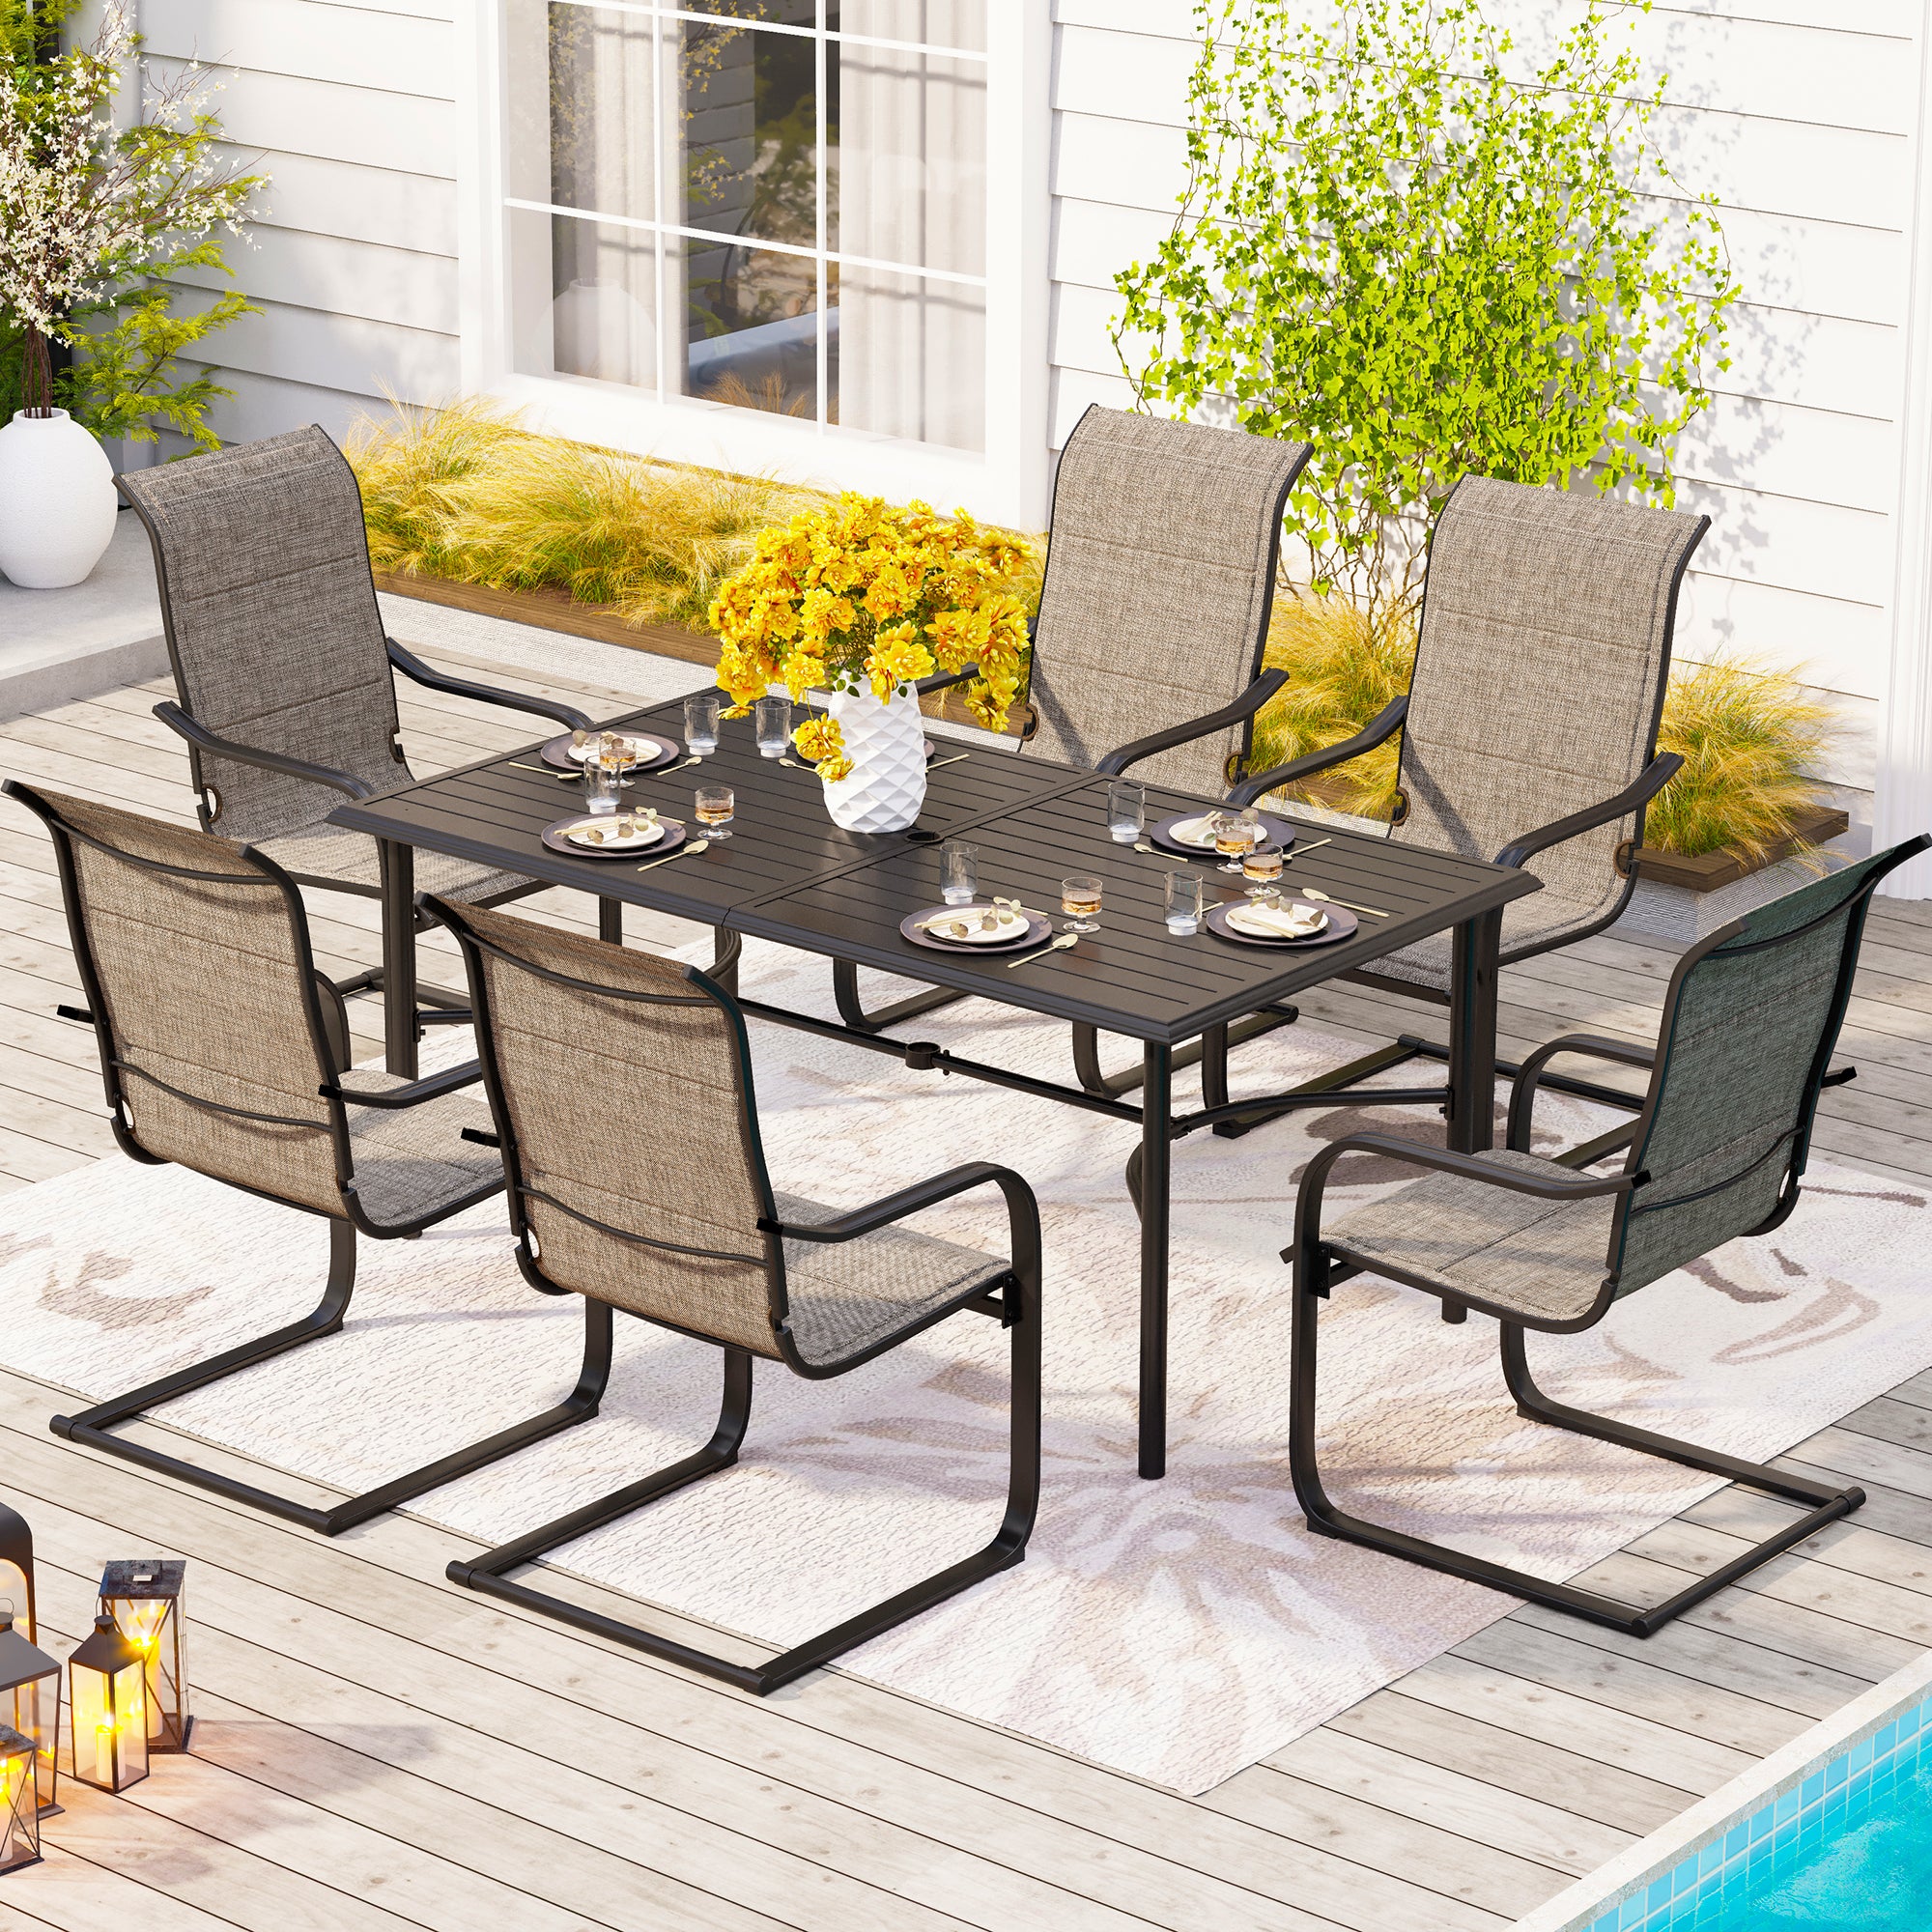 MFSTUDIO 7-Piece Patio Dining Set Bowed-bar Table & High-back Textilene C-spring Chairs